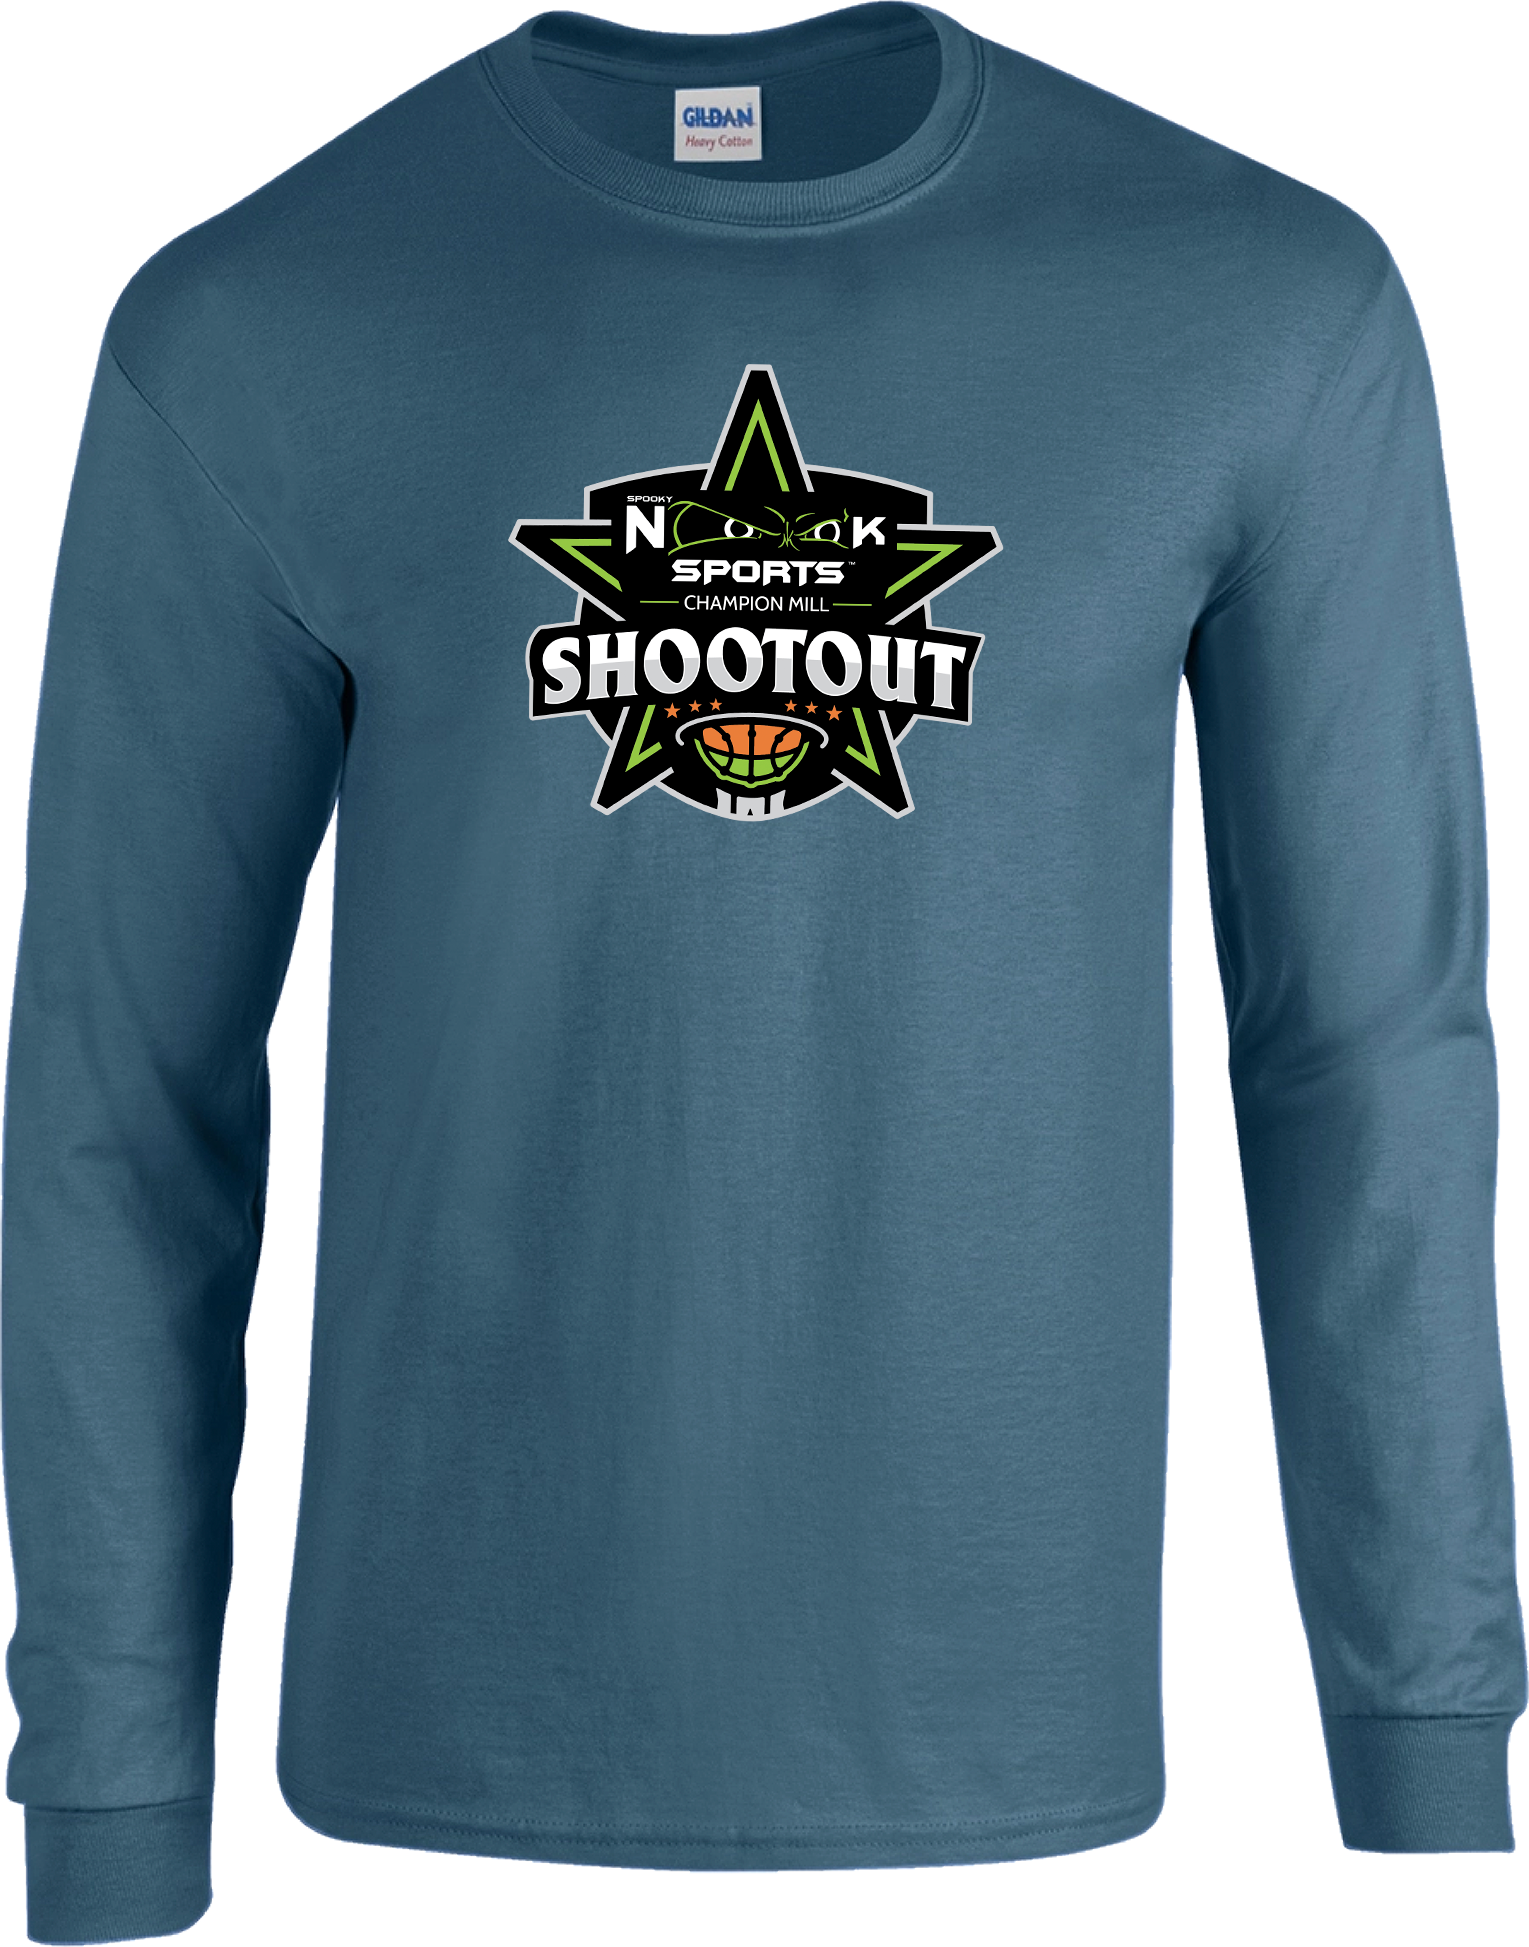 LONG SLEEVES - 2023 Spooky Nook Sports Champion Mill Shootout